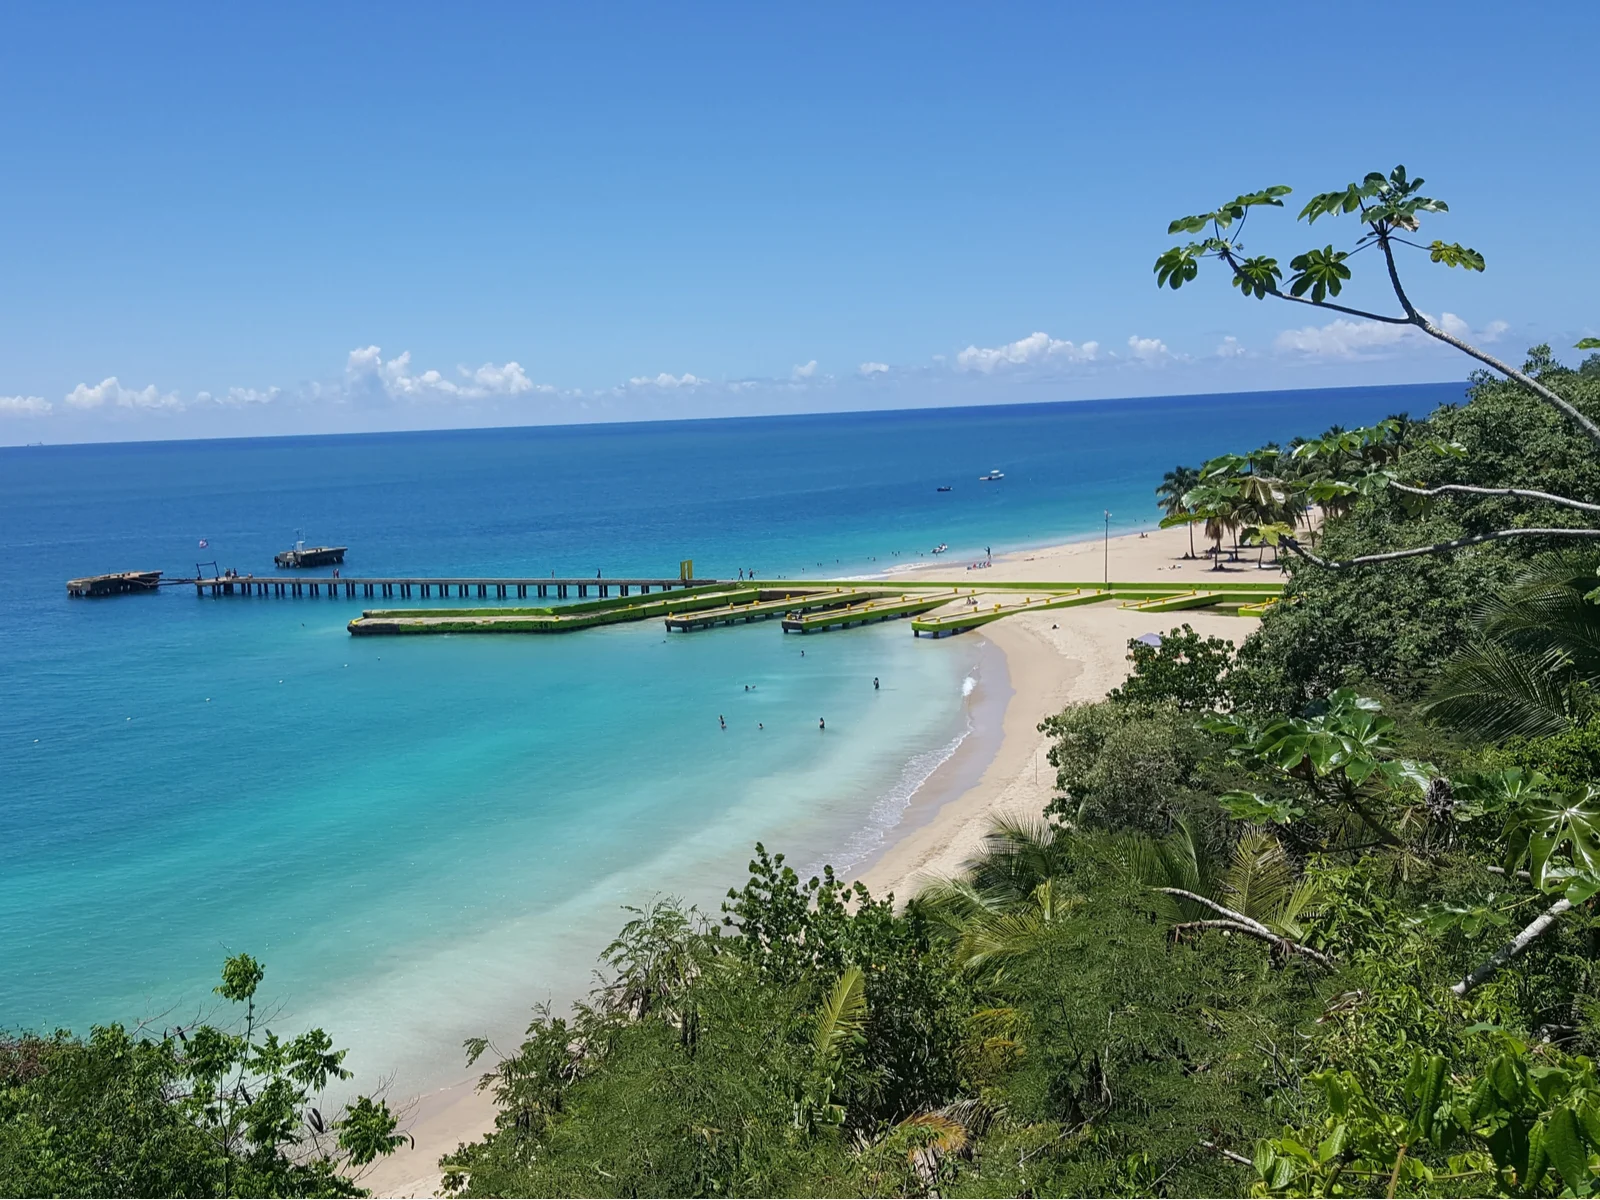 Crash boat, one of the best beaches in Puerto Rico, pictured from an elevated view